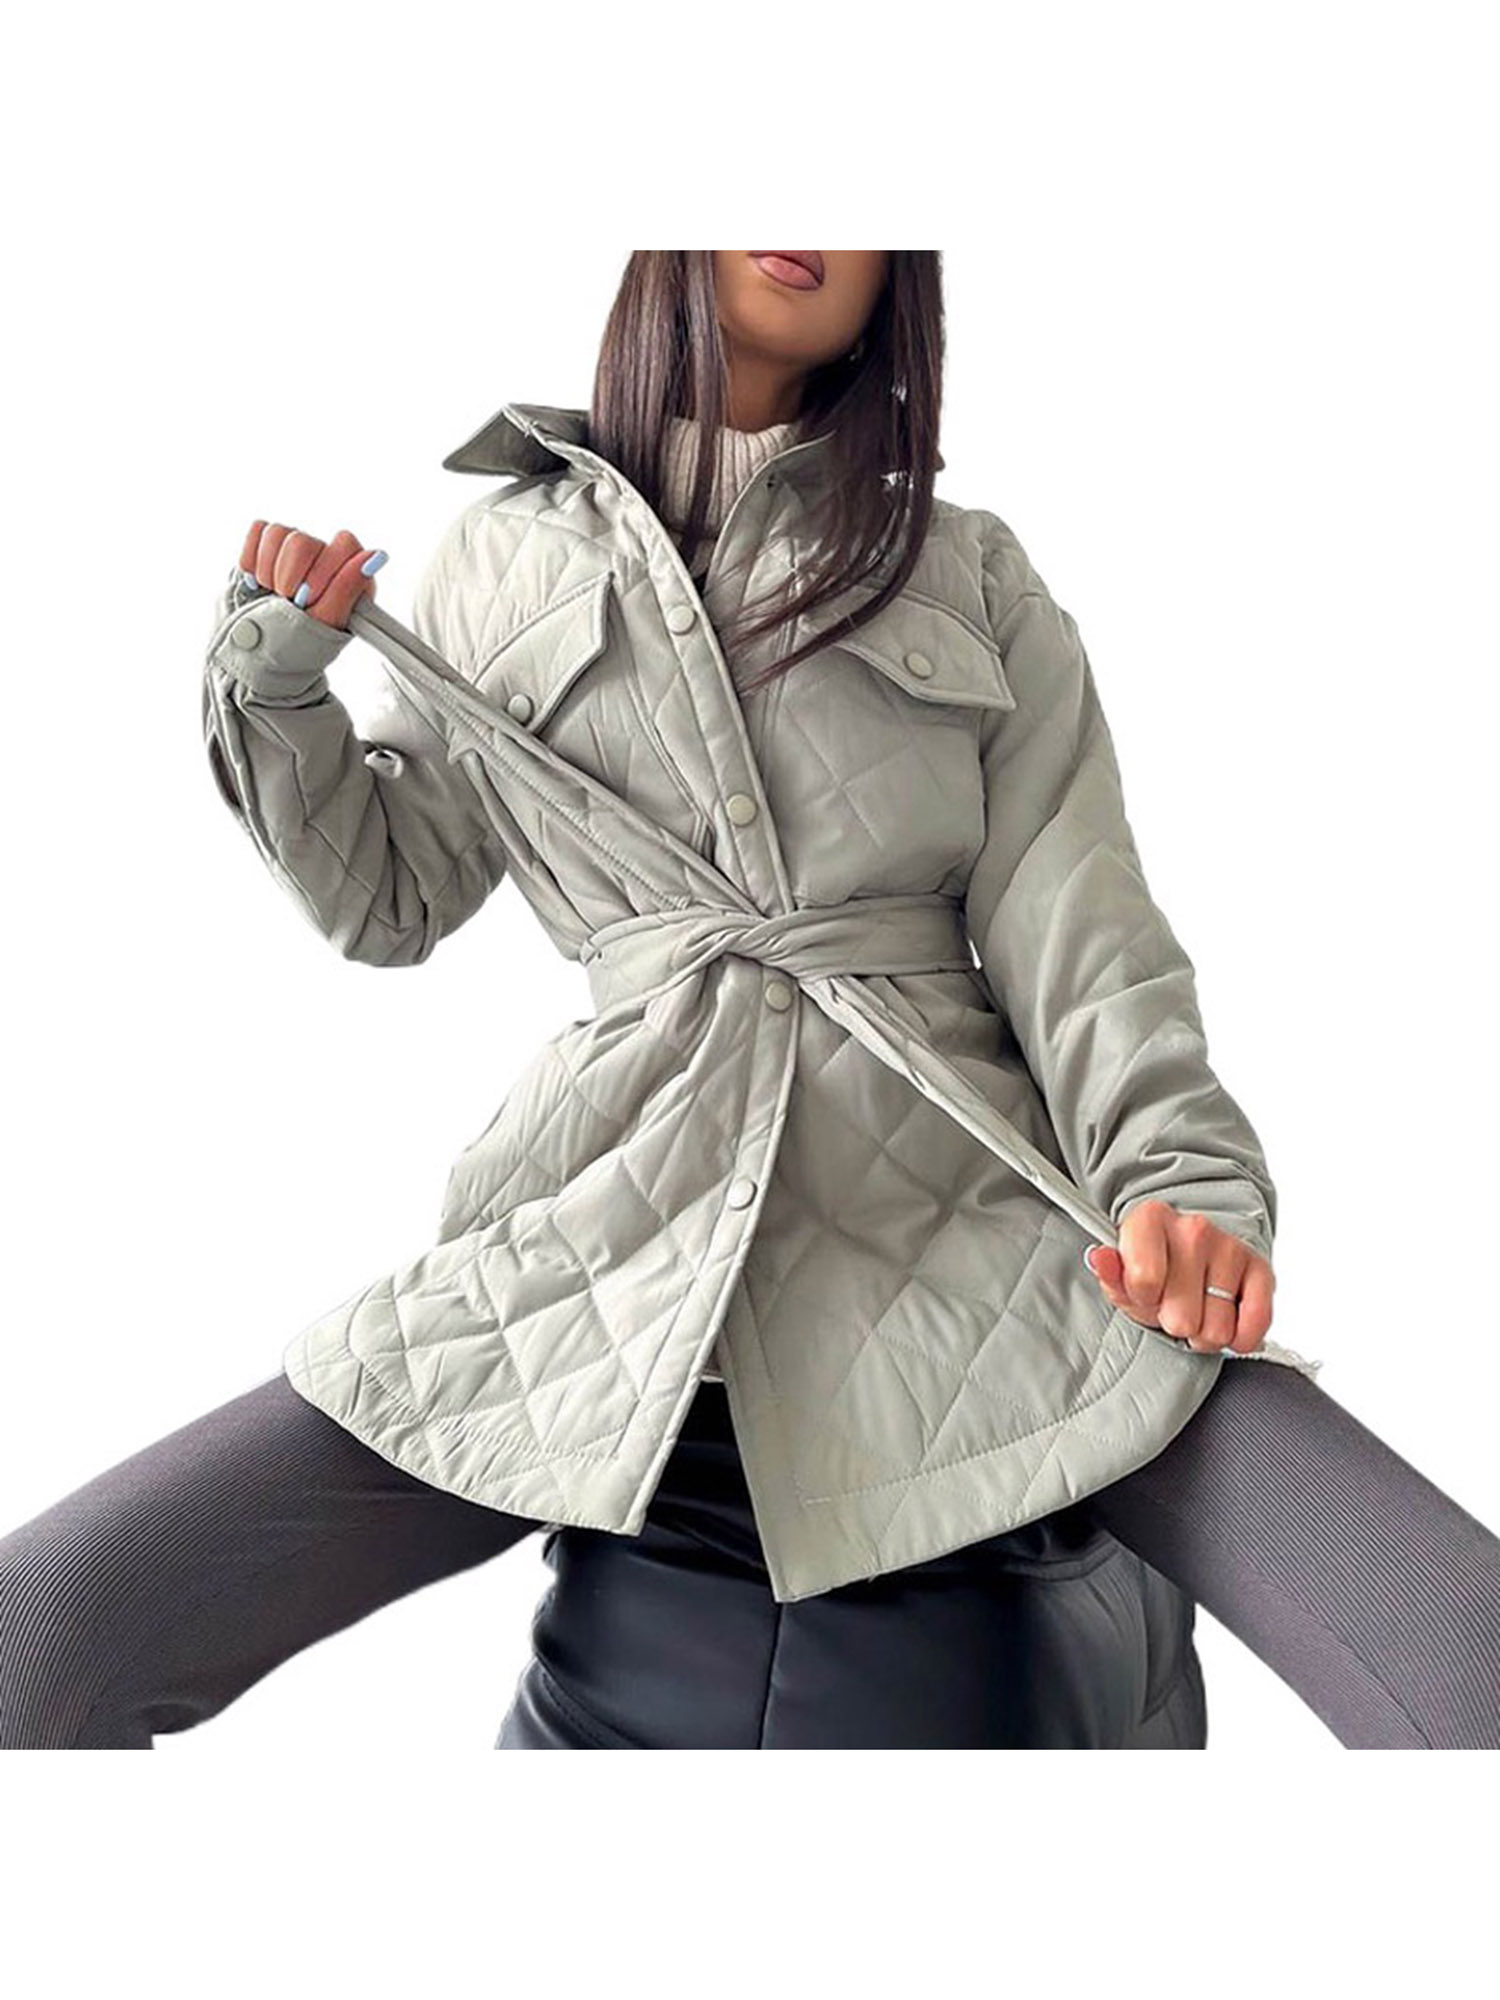 Licupiee Women Quilted Jacket with Belt Lightweight Casual Warm Solid Single Breasted Long Sleeve Outwears Overcoat Streetwear - image 2 of 3